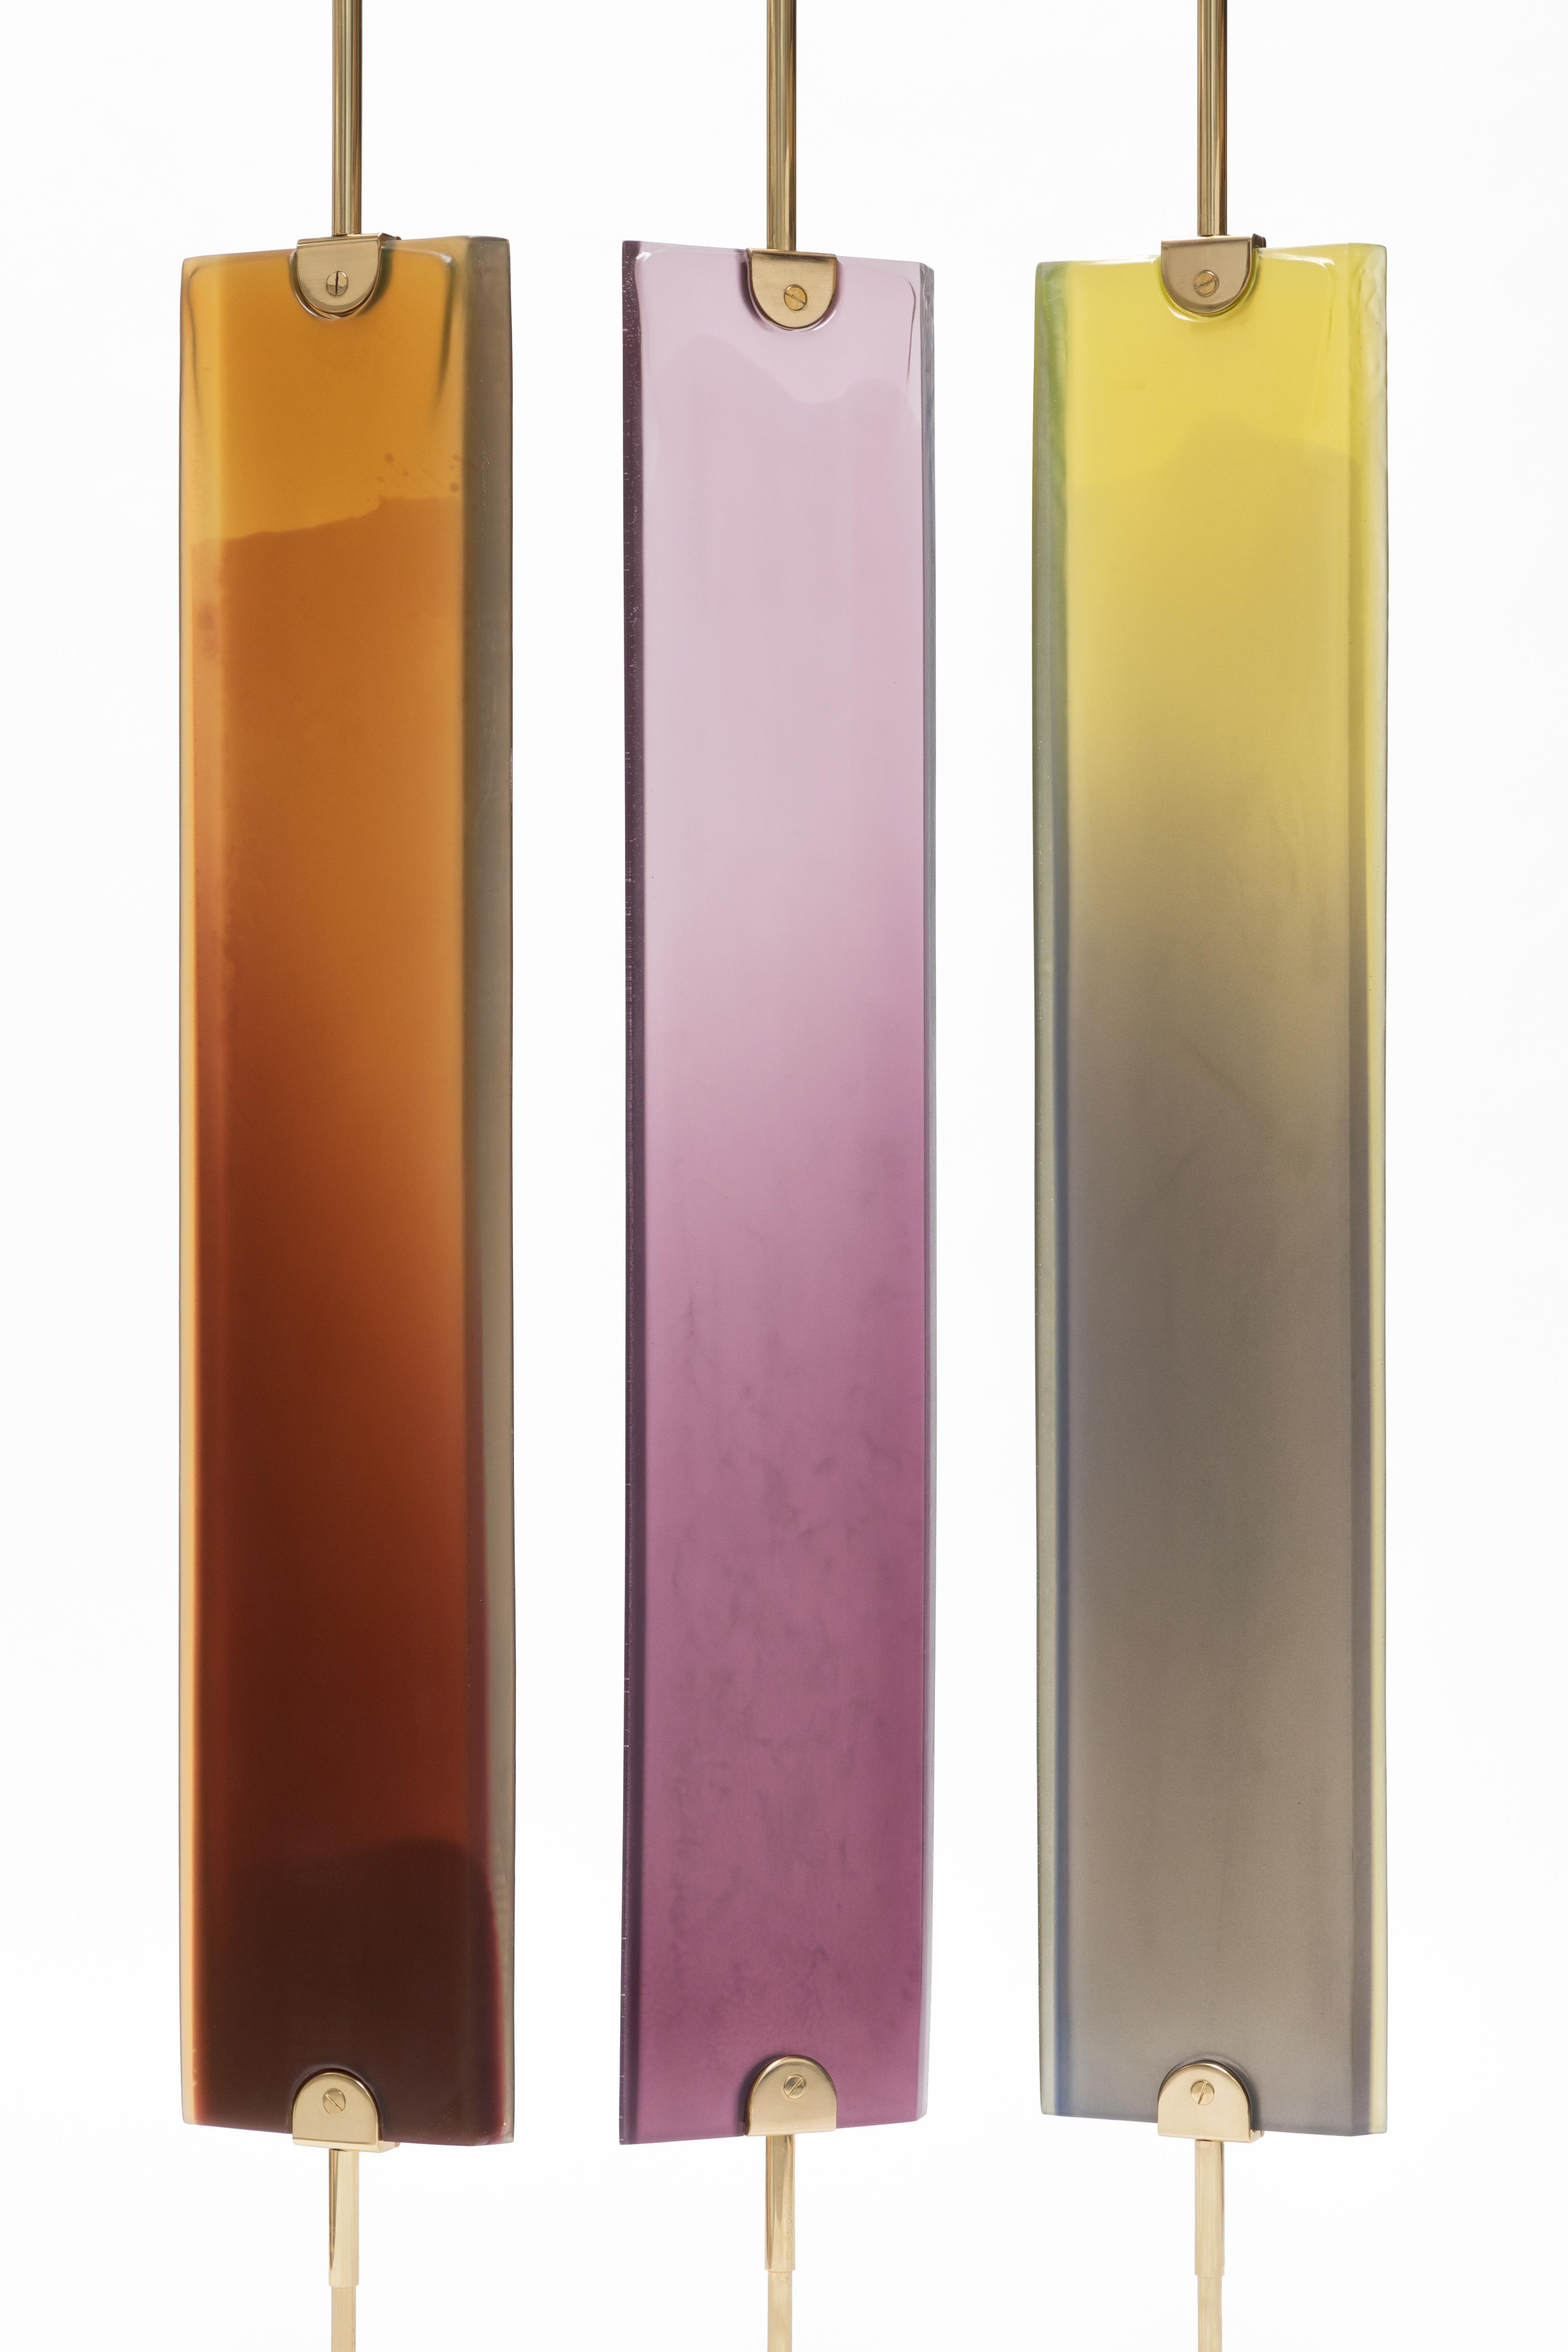 Contemporary Reverso Separè Light Violet by Draga&Aurel Resin and Brass, 21st Century For Sale